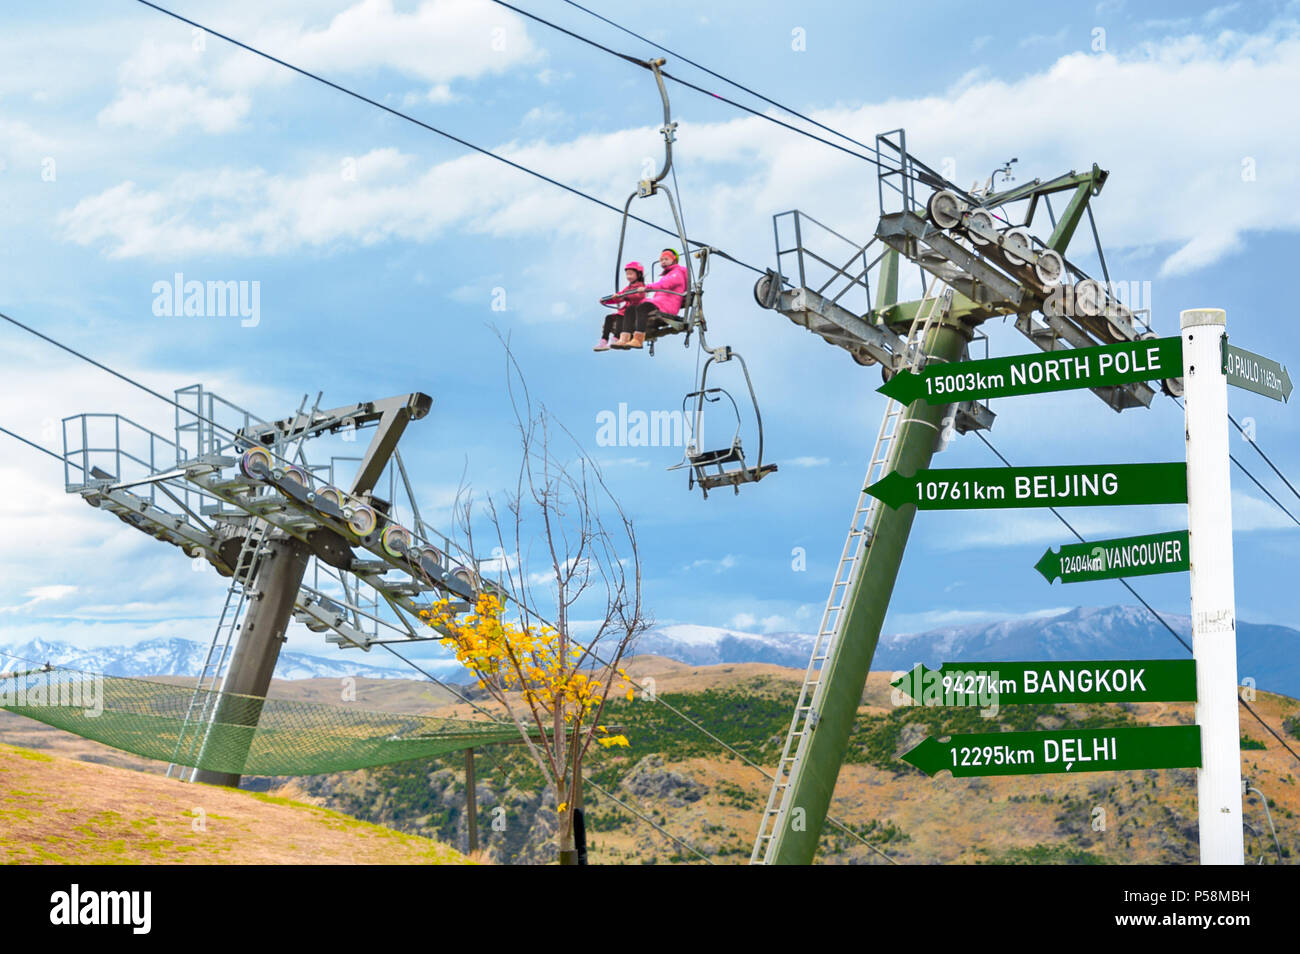 Queenstown, NZ – April 15, 2018: Fun riders with their carts on a cable chair lift going up the hill top for a luge ride with mountains and snow. Stock Photo